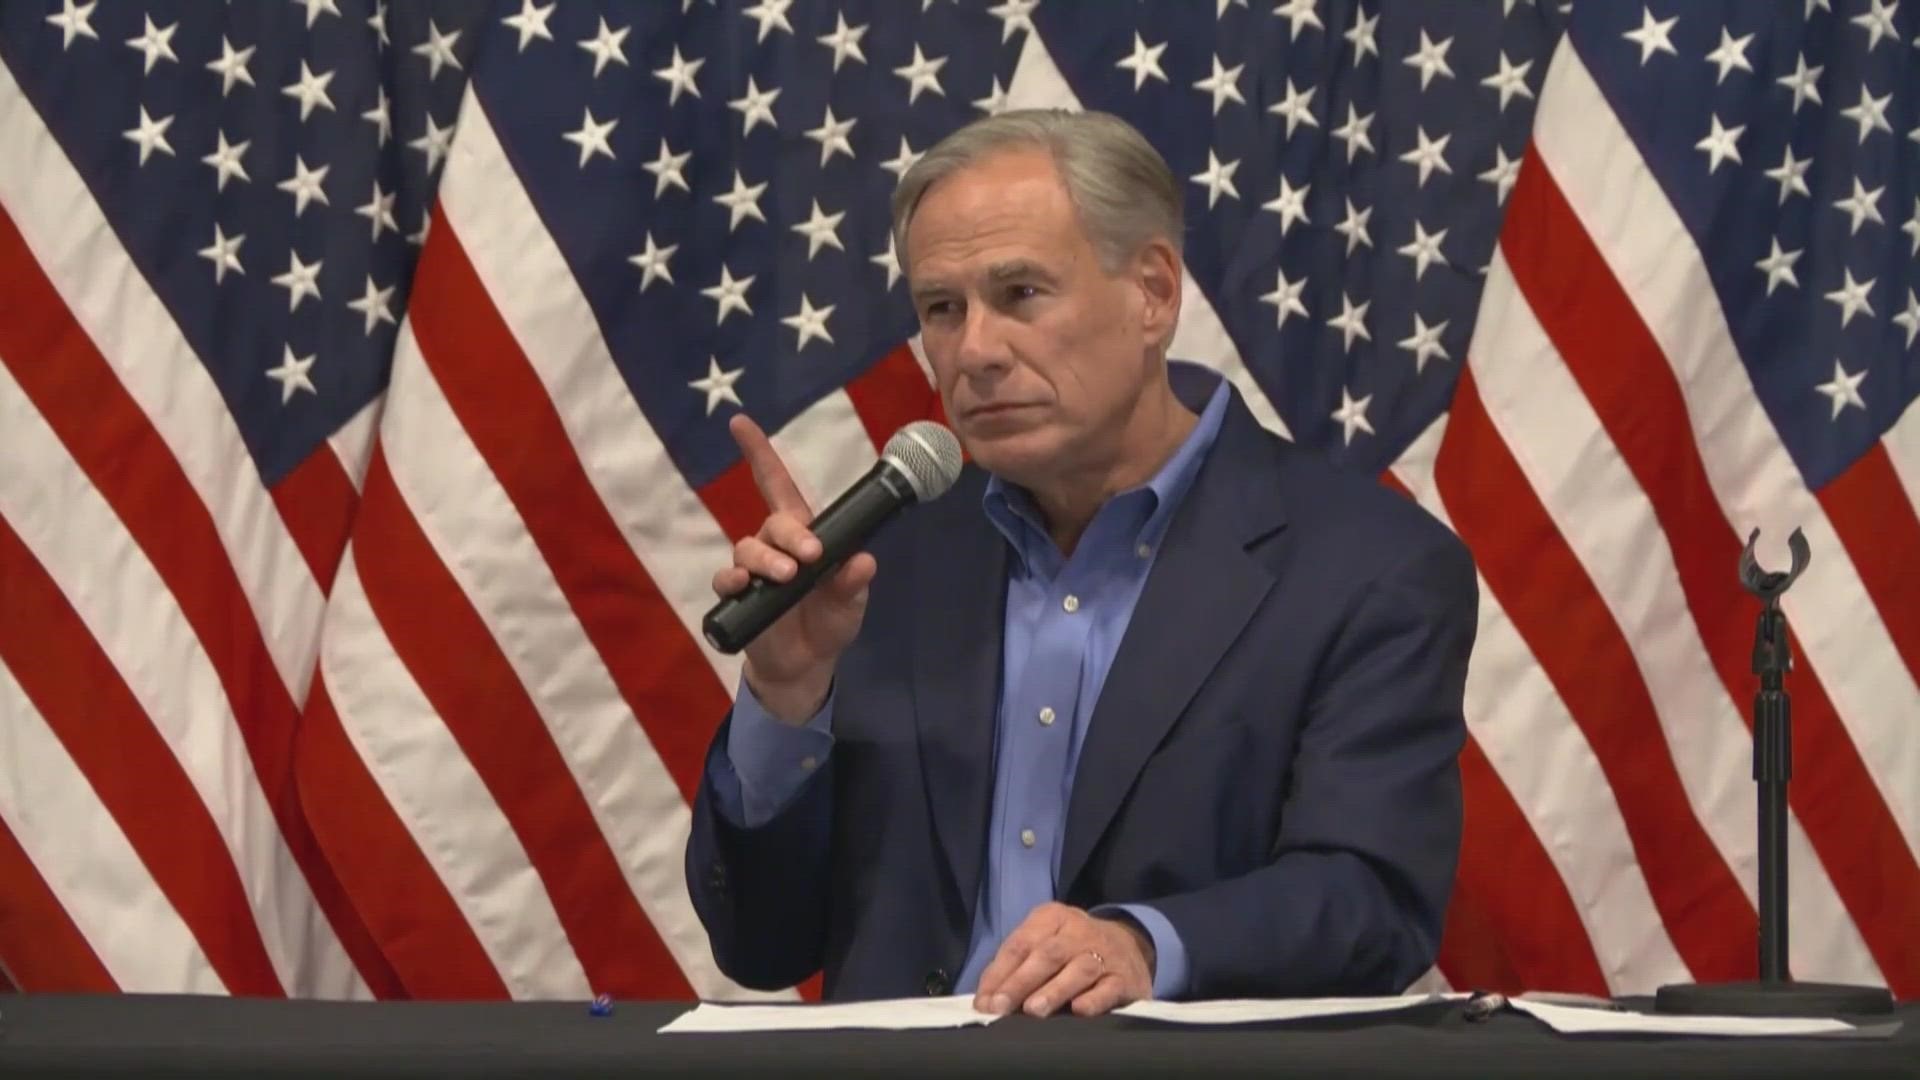 Gov. Abbott unveiled his new "Parental Bill of Rights" at an event at a school in Lewisville.